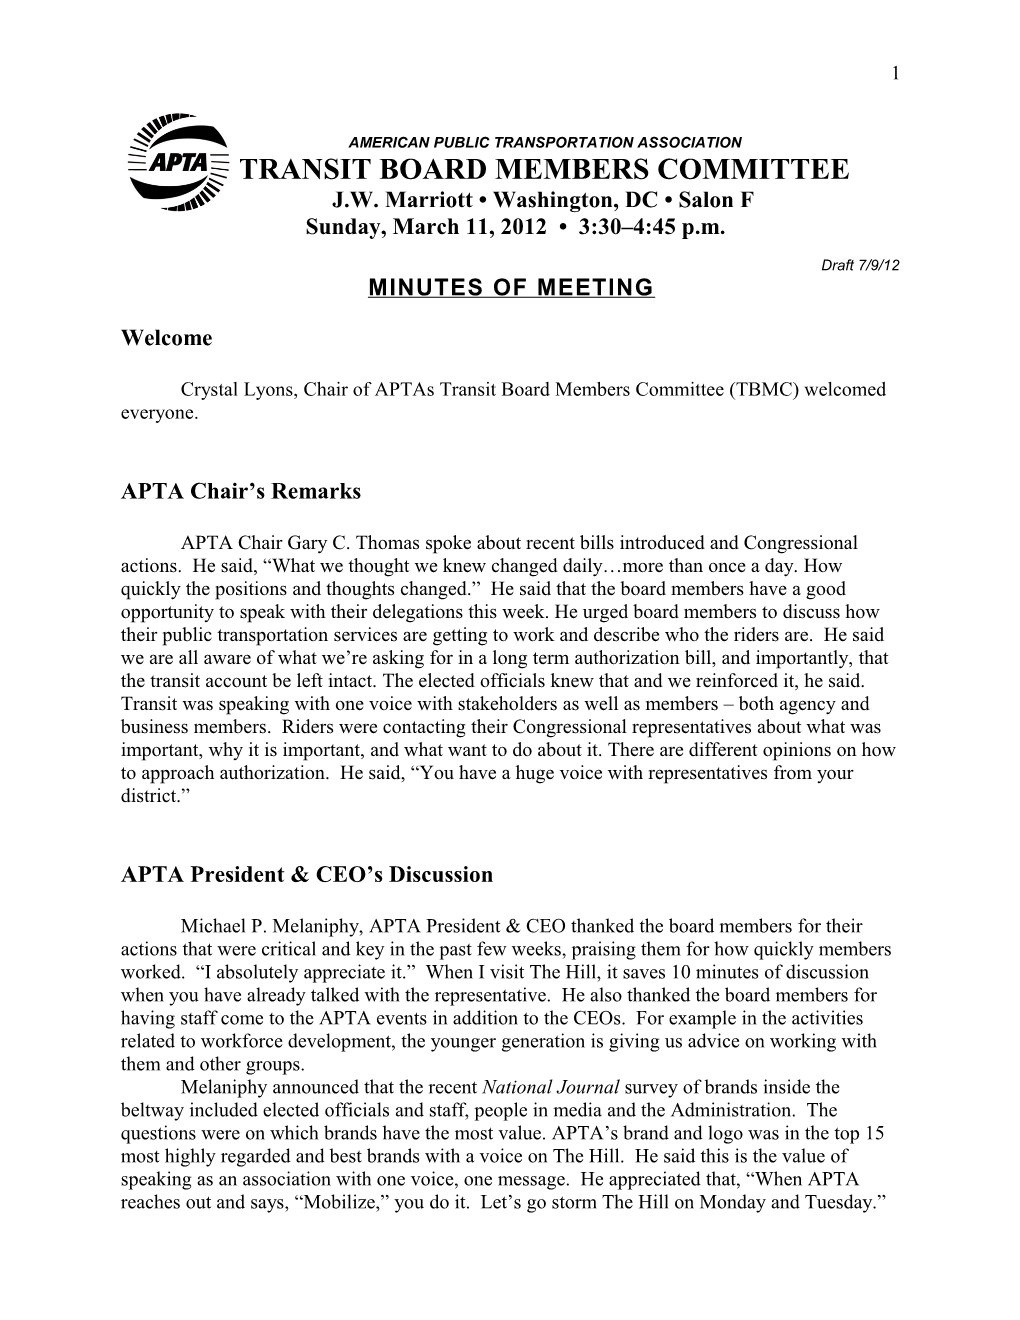 Transit Board Members Committee - Minutes of March 2012 Meeting